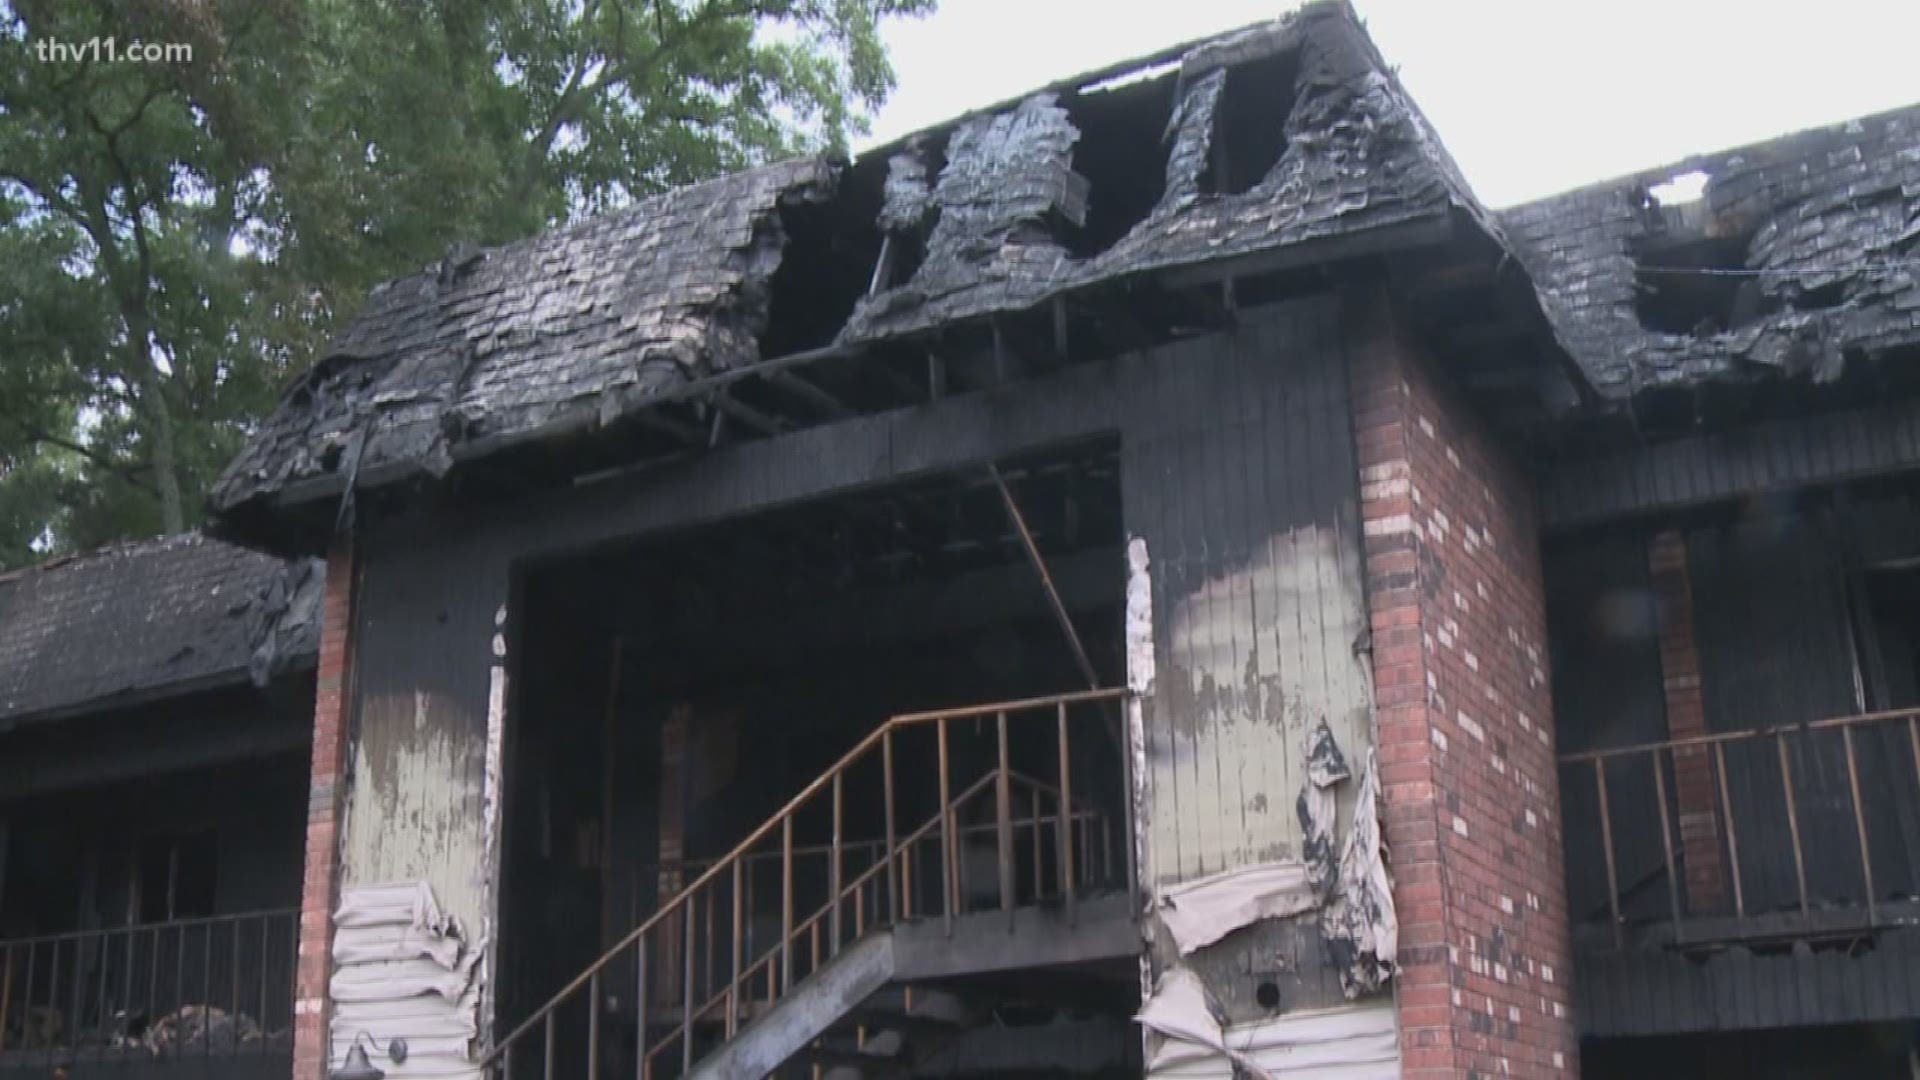 Several families in lonoke are looking for new places to stay after a deadly fire in their apartment building.